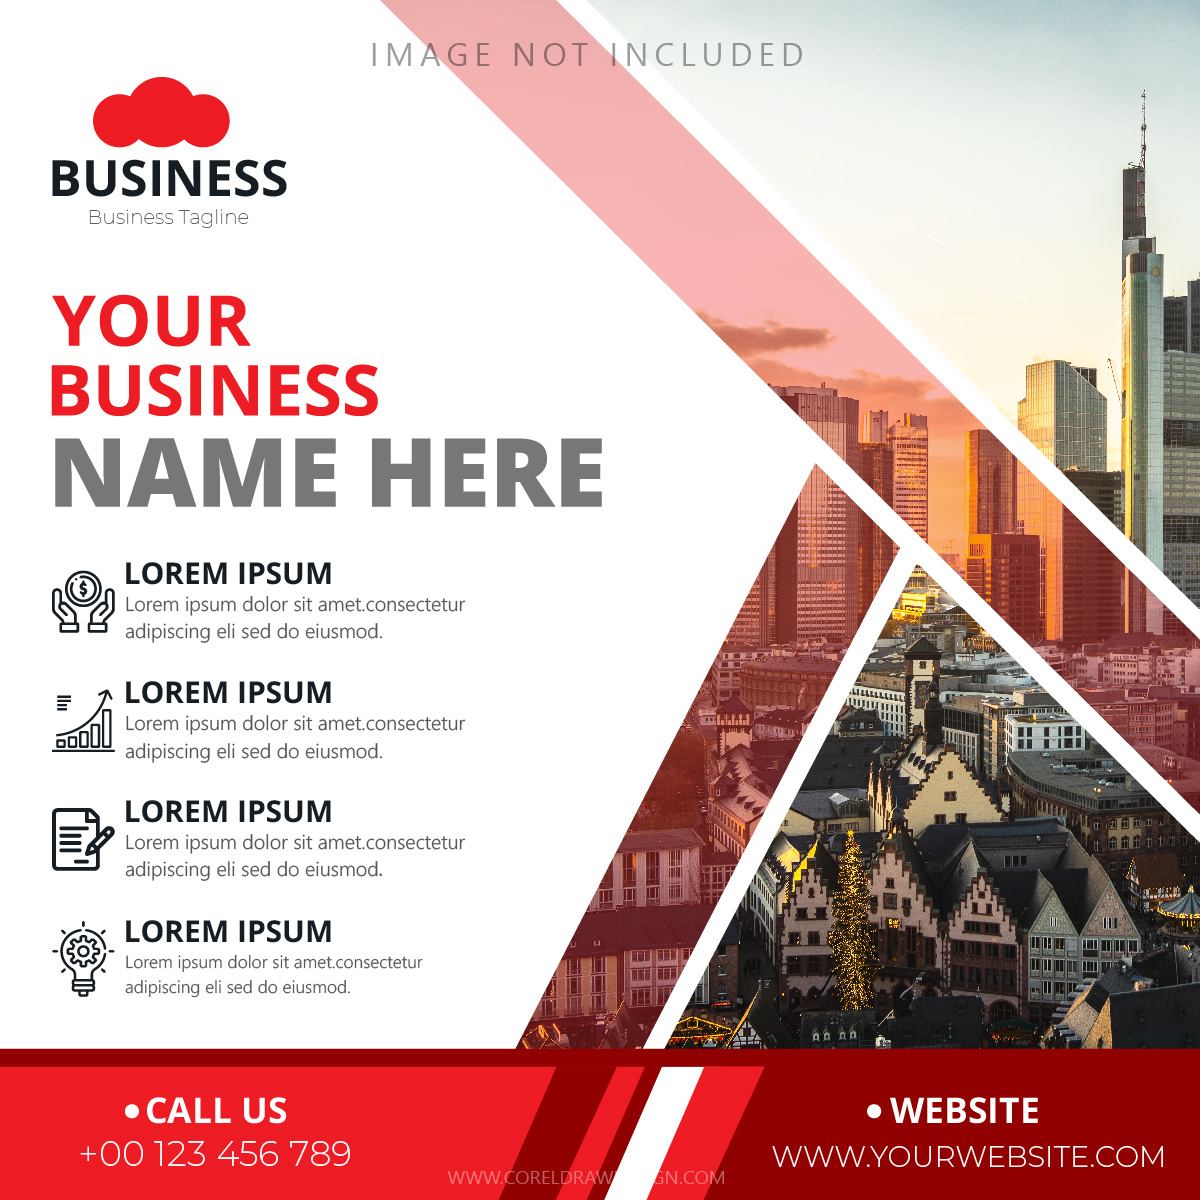 Corporate Promotional Business Banner Template